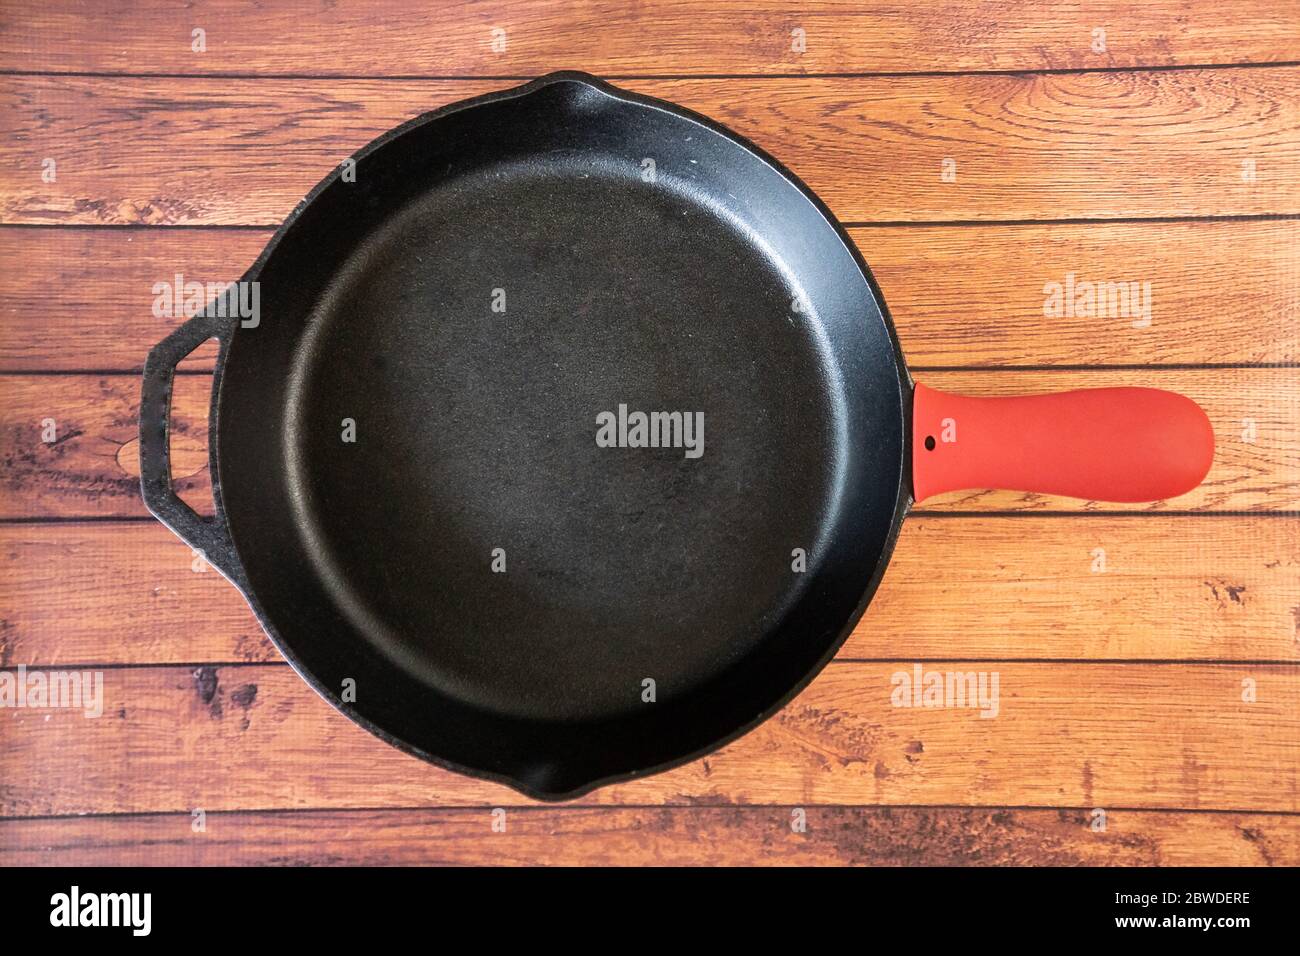 https://c8.alamy.com/comp/2BWDERE/silicone-hot-skillet-handle-cover-holder-insulating-kitchen-accessory-protects-hands-from-hot-pan-handles-heat-resistant-silicone-creates-insulatin-2BWDERE.jpg